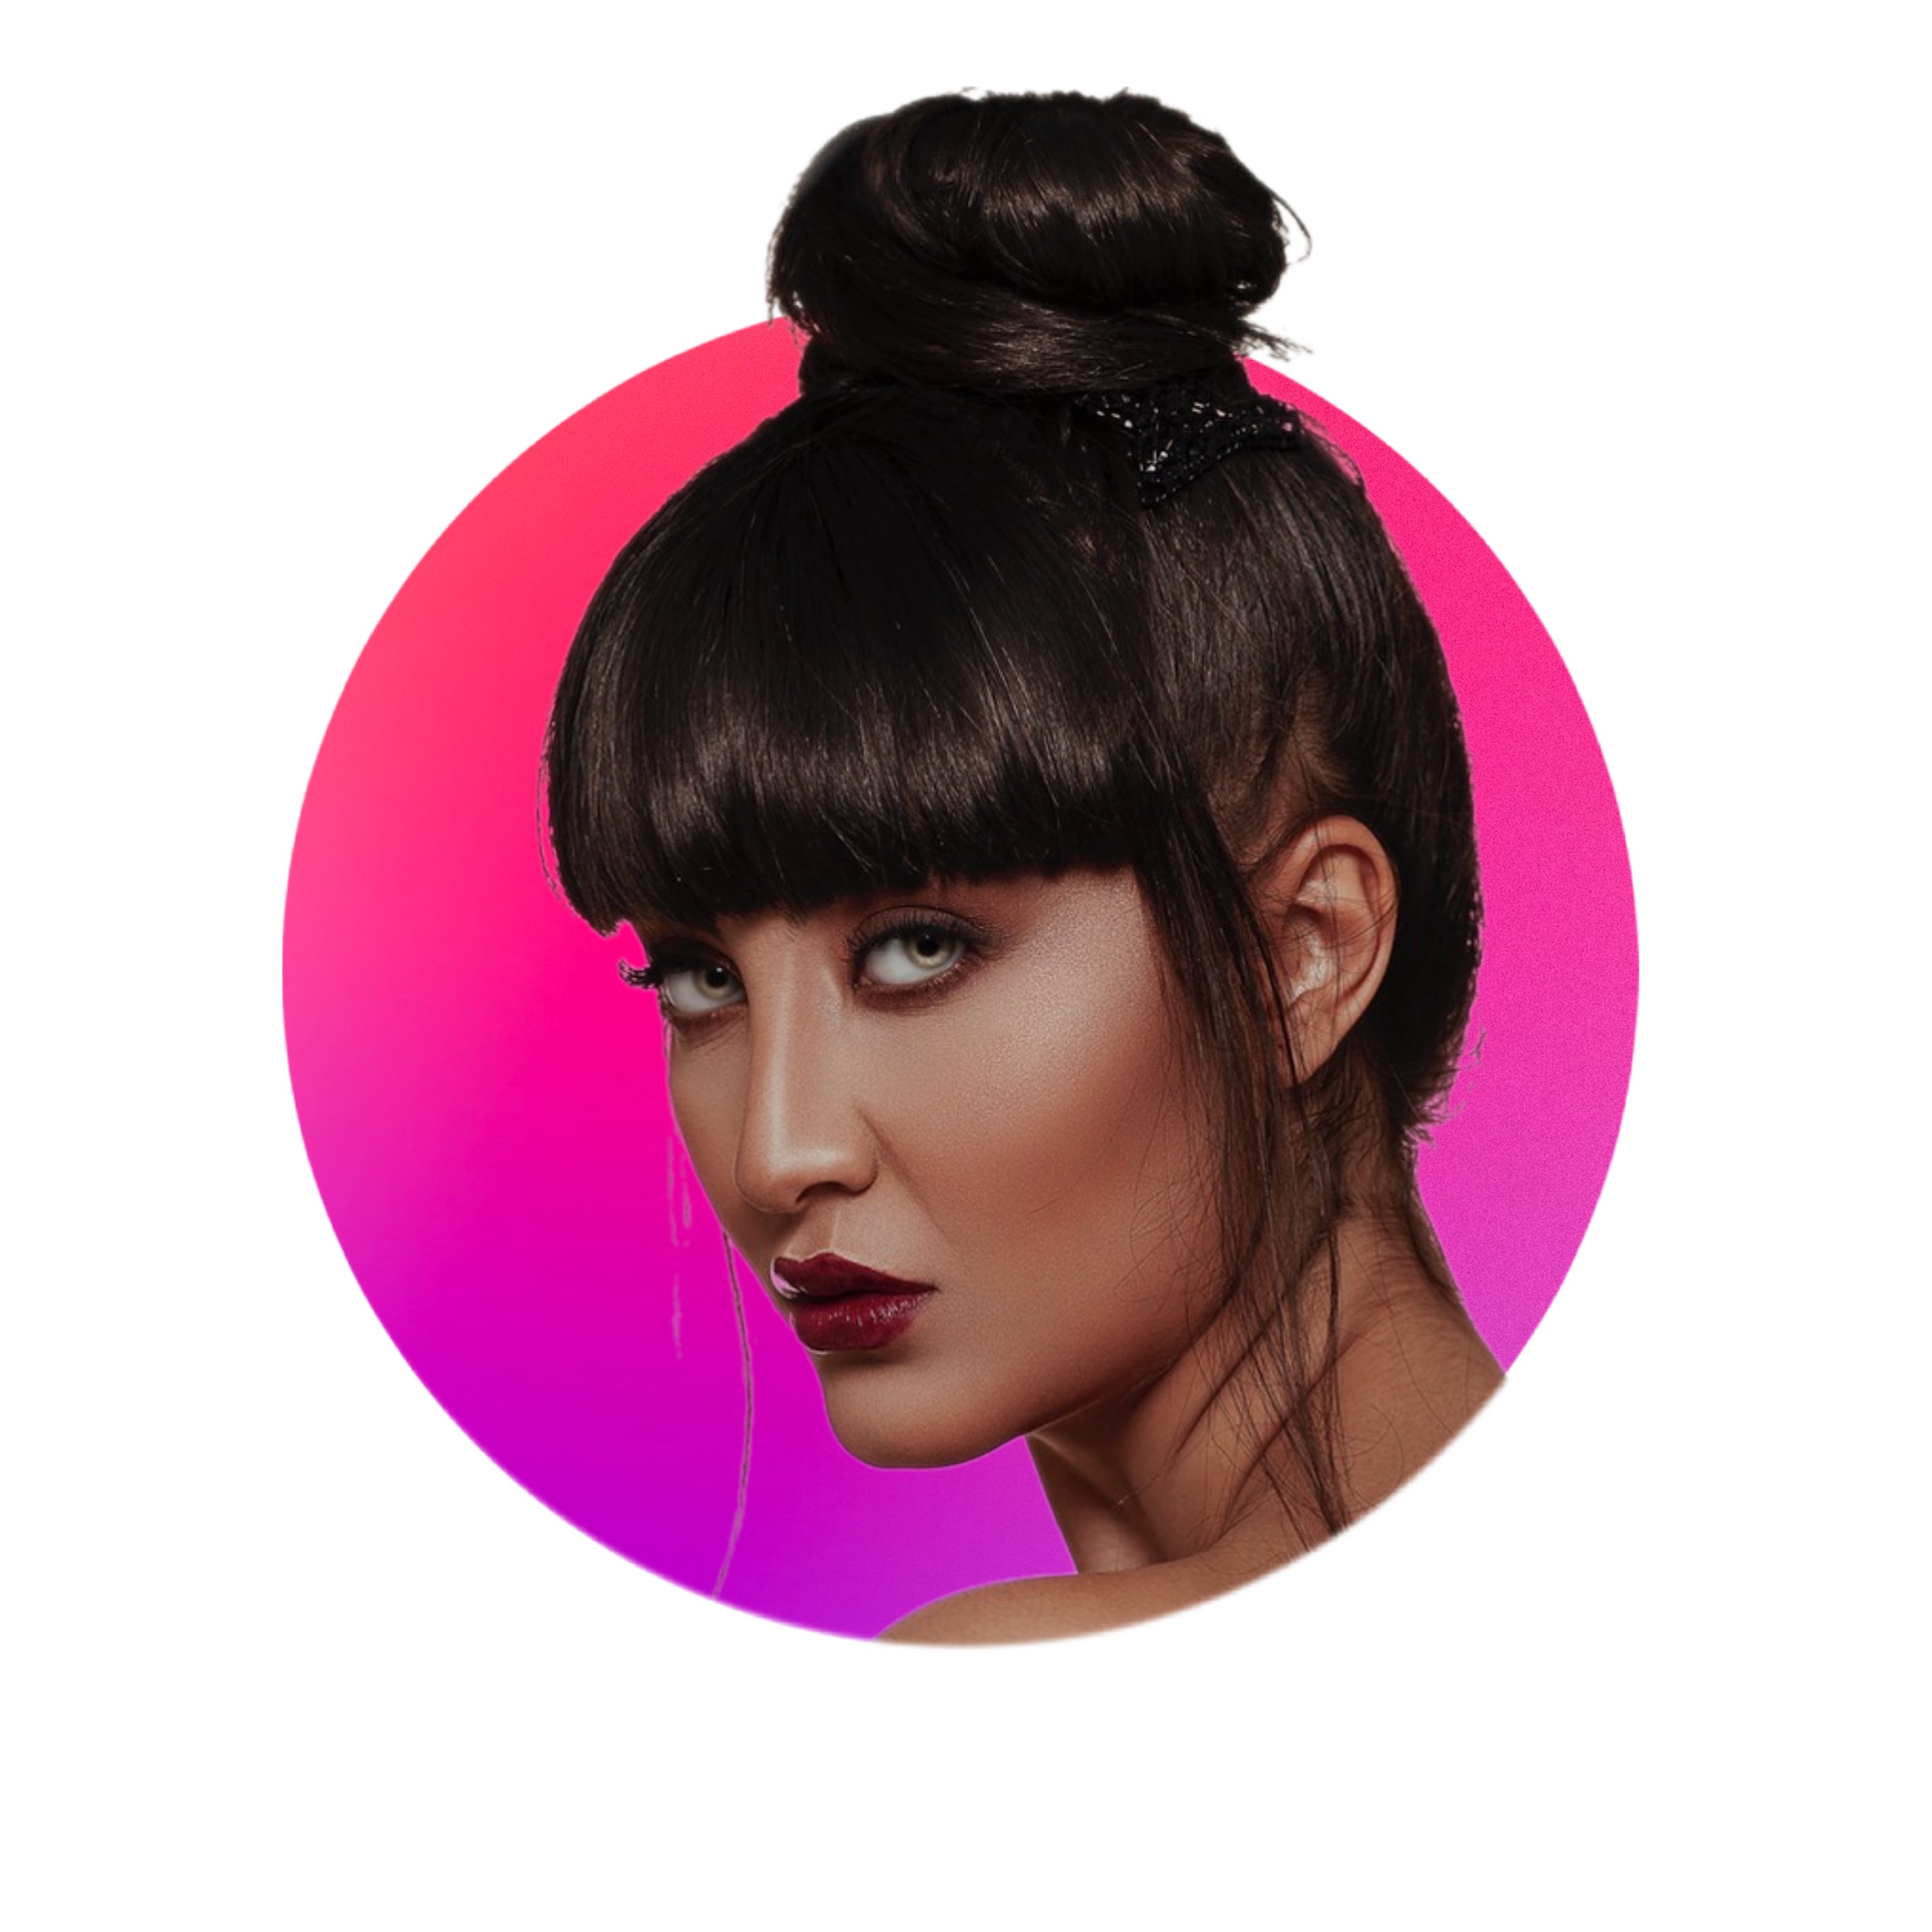 Profile Pic Round Pink Purple Circle With Woman